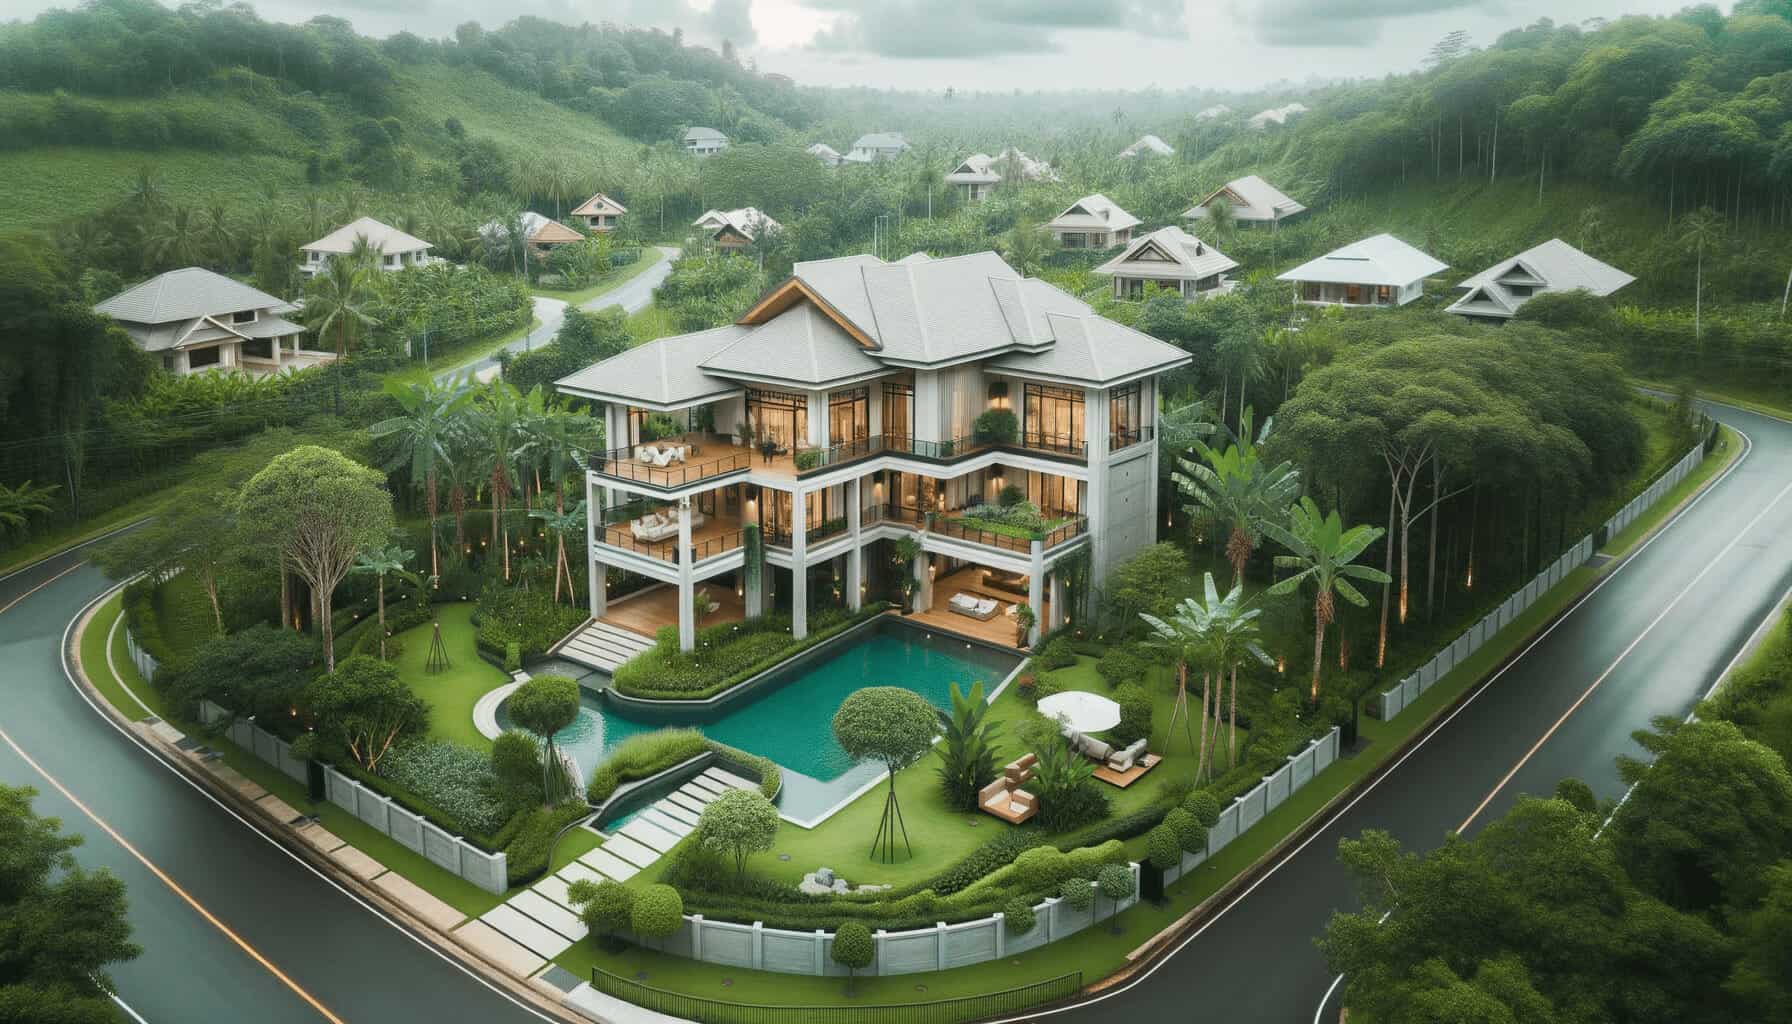 DALL·E 2023 10 16 13.32.46 Photo of a beautiful completed home built using IBS technology with lush greenery surrounding it